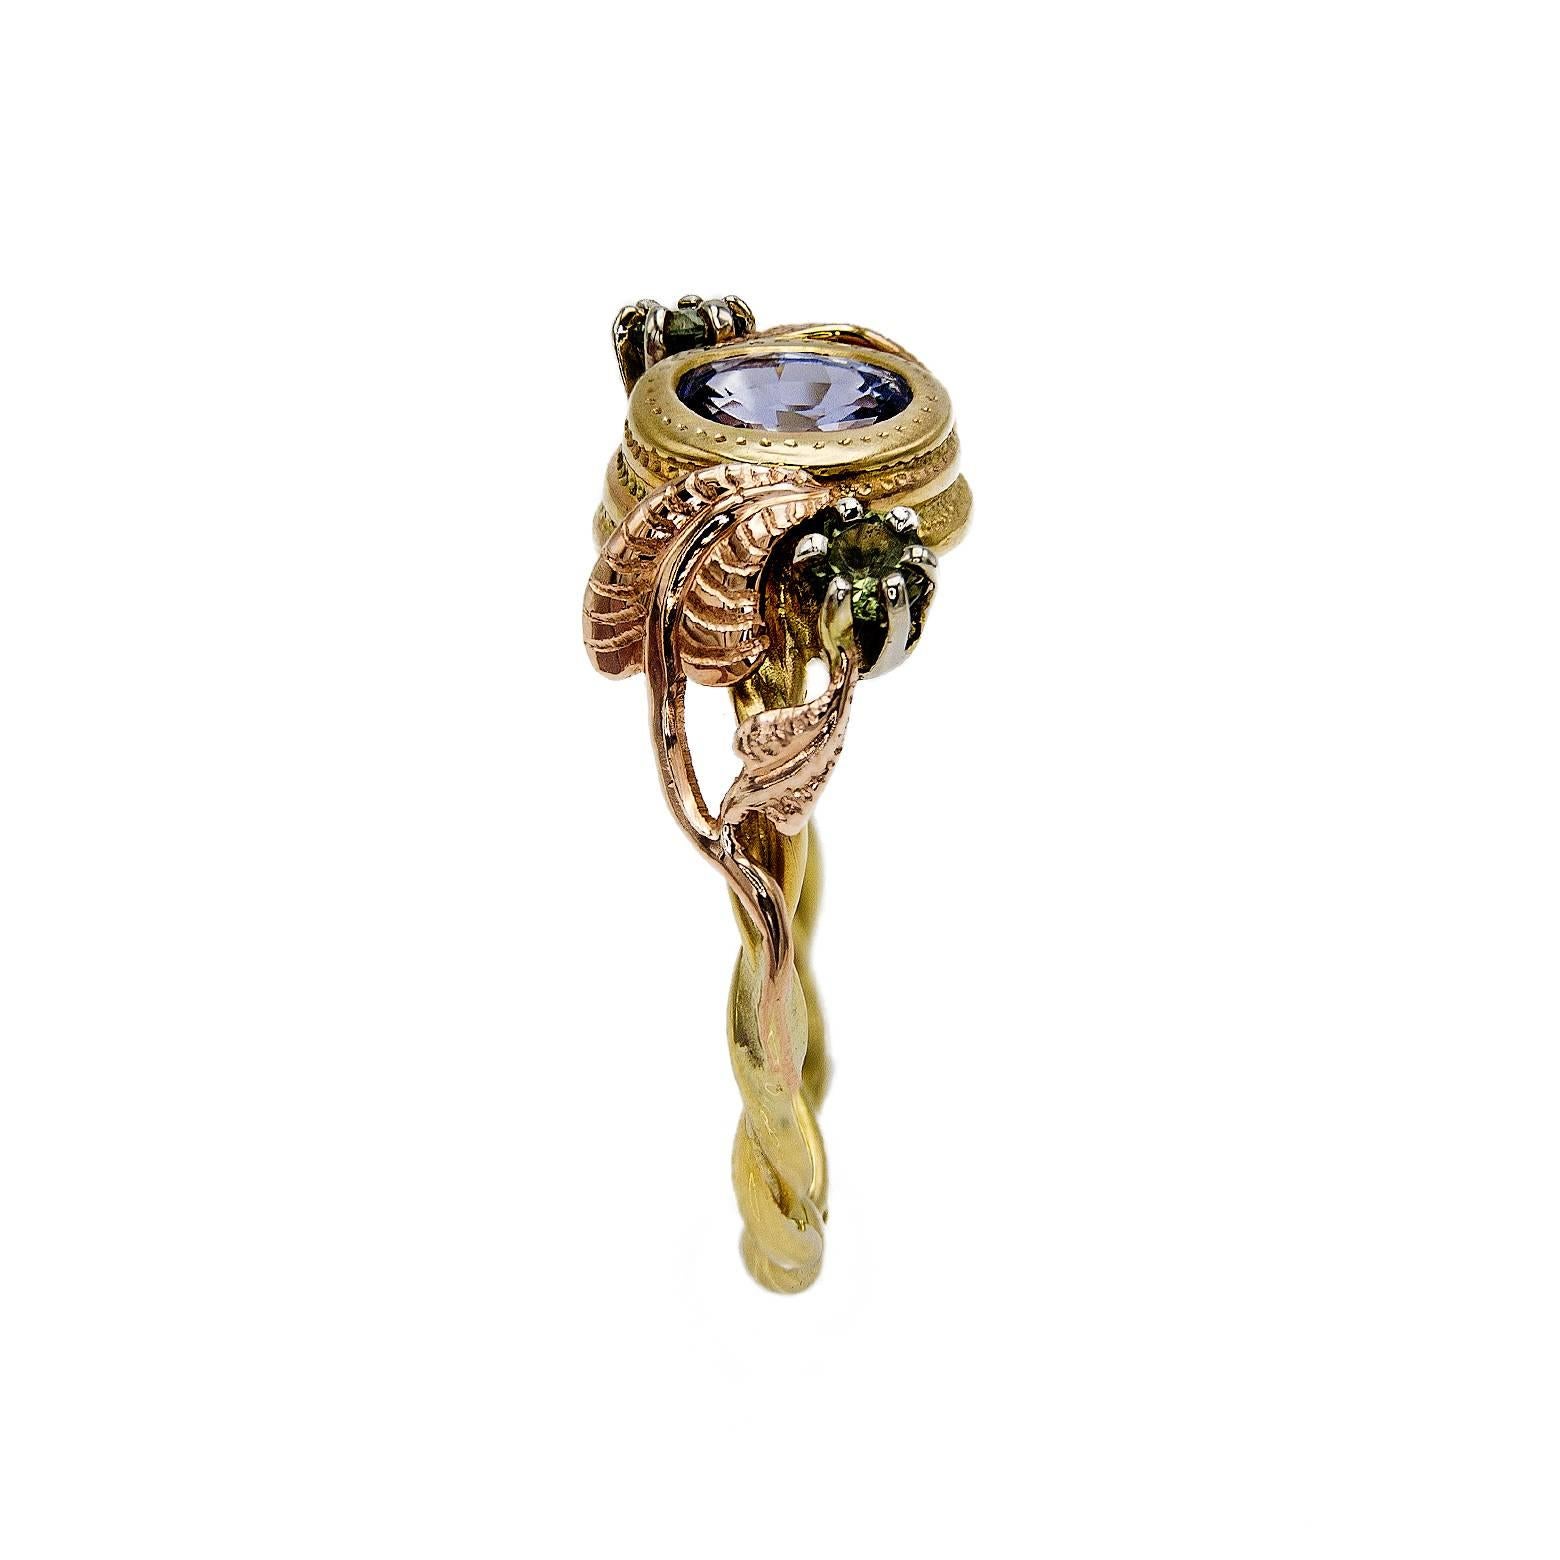 Artist Artisan Sapphire Ring with Rose Gold Leaves and Detailed Bezel